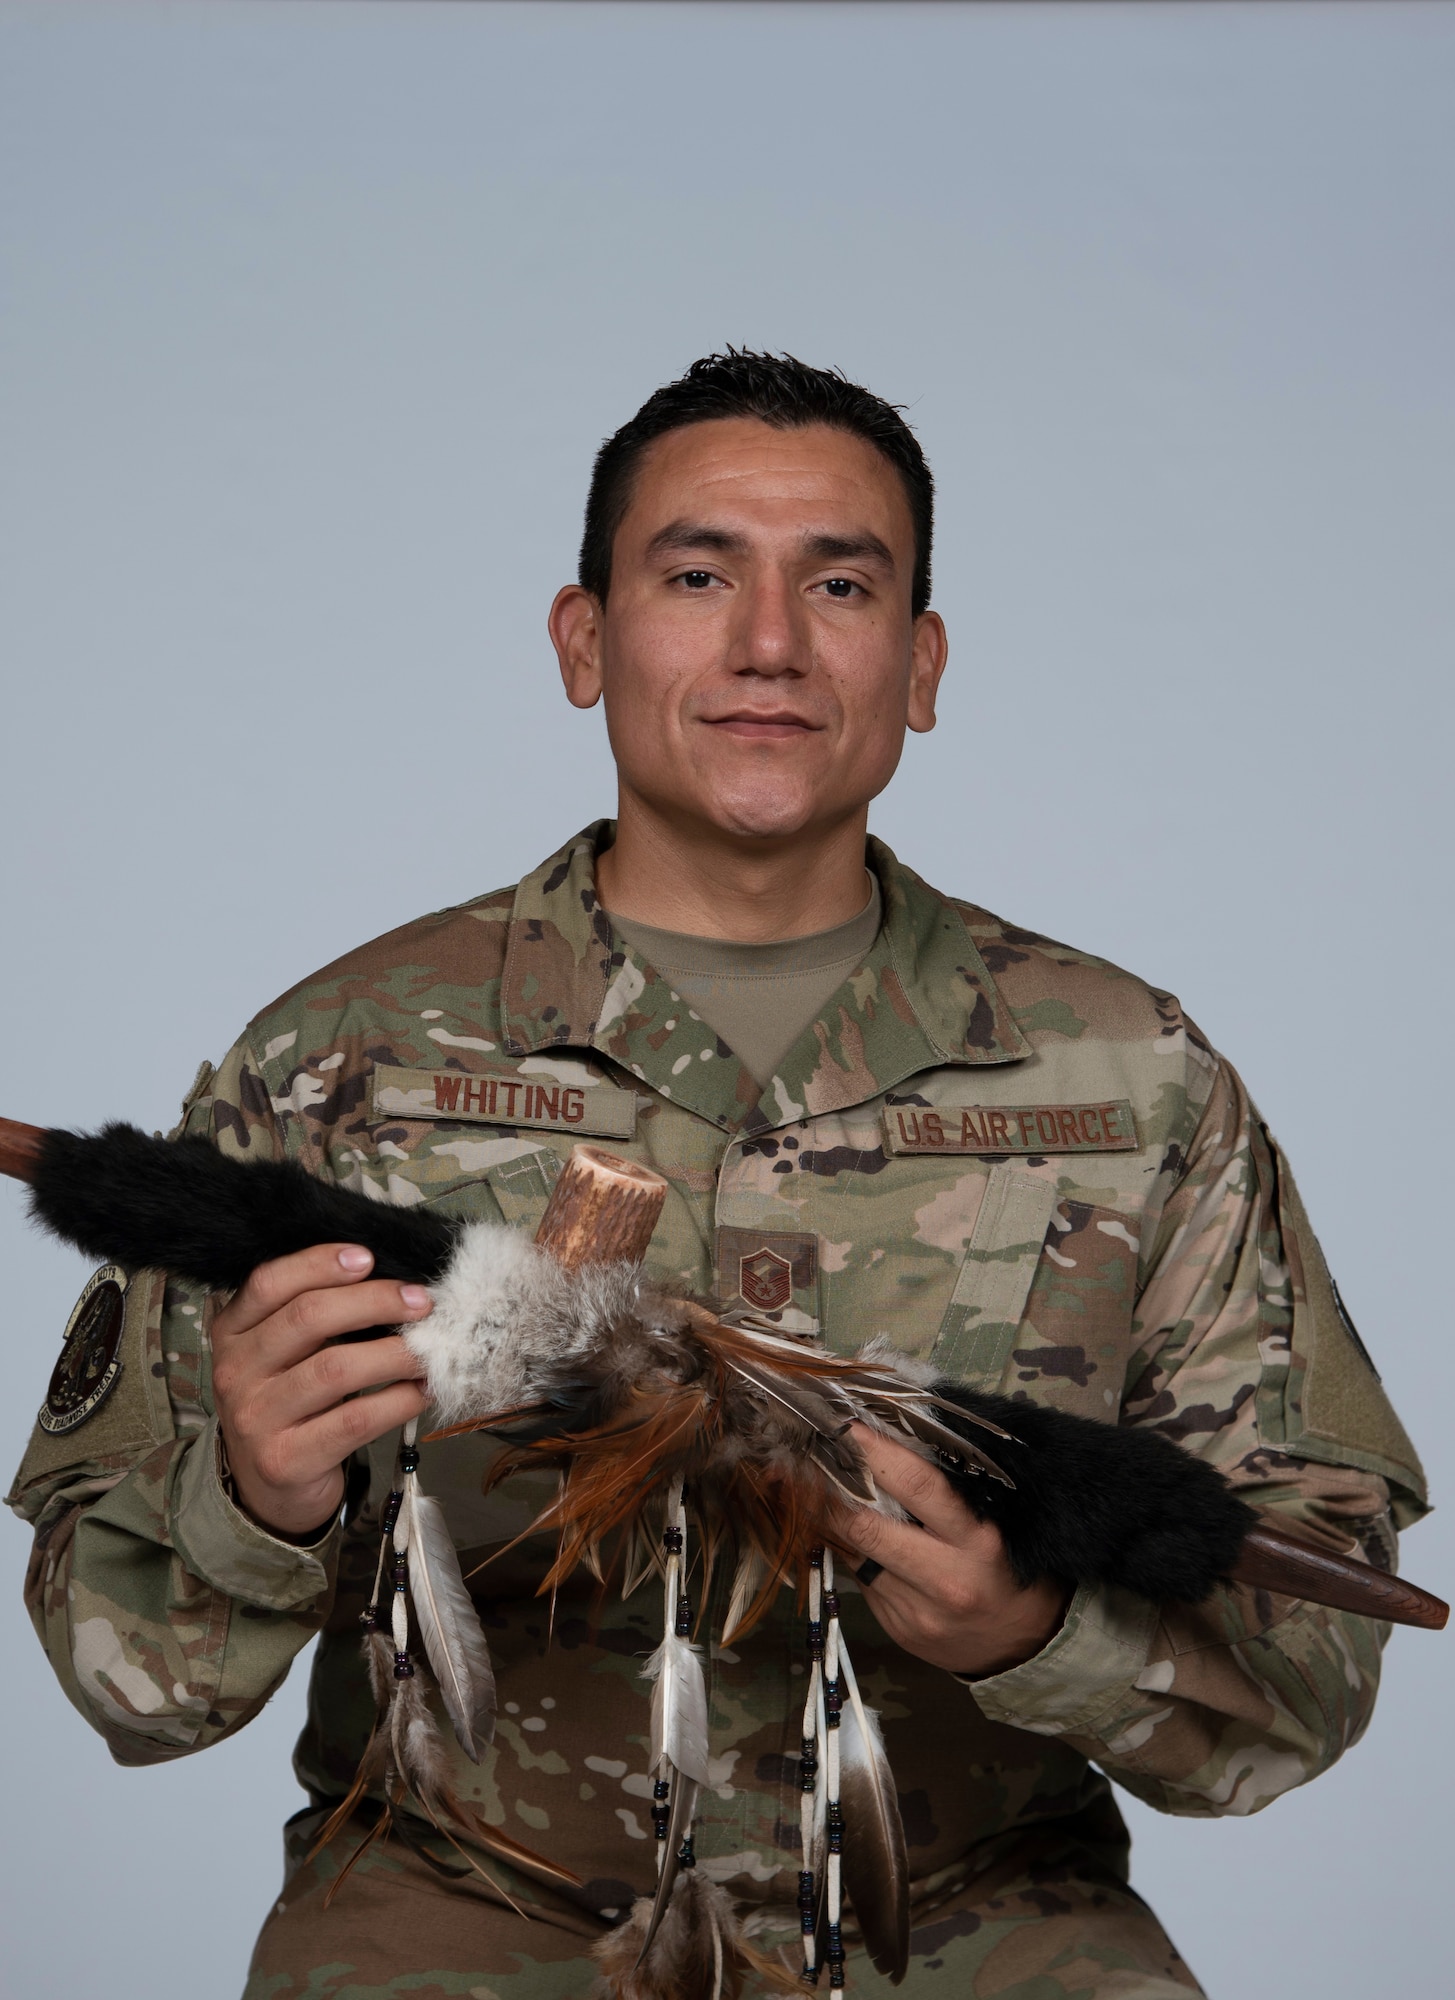 U.S. Air Force Master Sgt. David Whiting, 81st Medical Group diagnostic imaging section chief, poses for a photo at Keesler Air Force Base, Mississippi, April 29, 2021. The Sacred Pipe of the Lakota Sioux in Whiting's grip is a symbolism for unity and transition of life. (U.S. Air Force photo by Senior Airman Kimberly L. Mueller)